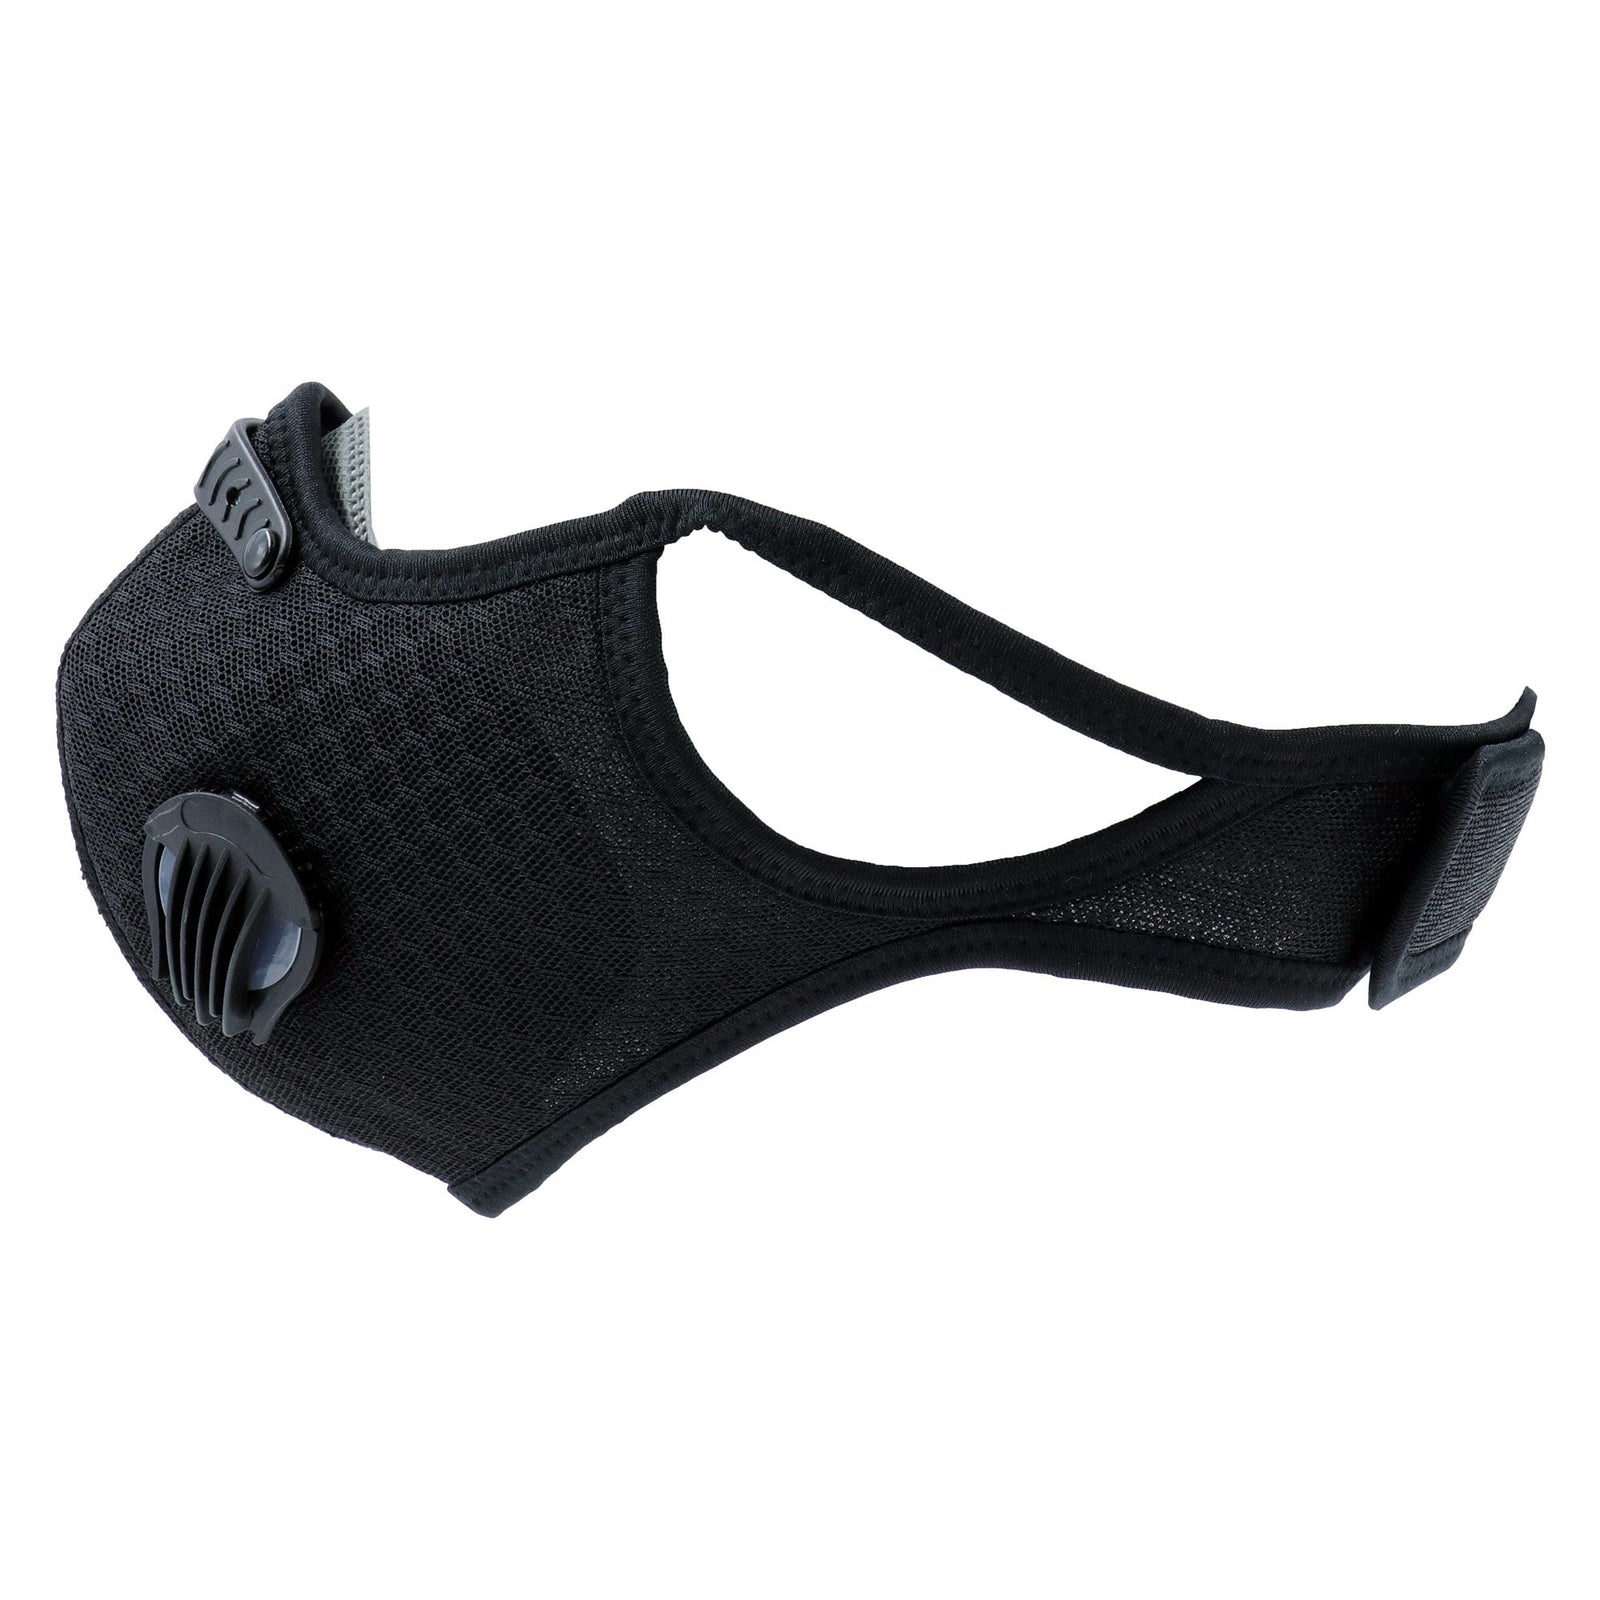 SSFCM-006  Adjustable Sports Face Mask Reusable with Filter and  Exhalation Valves